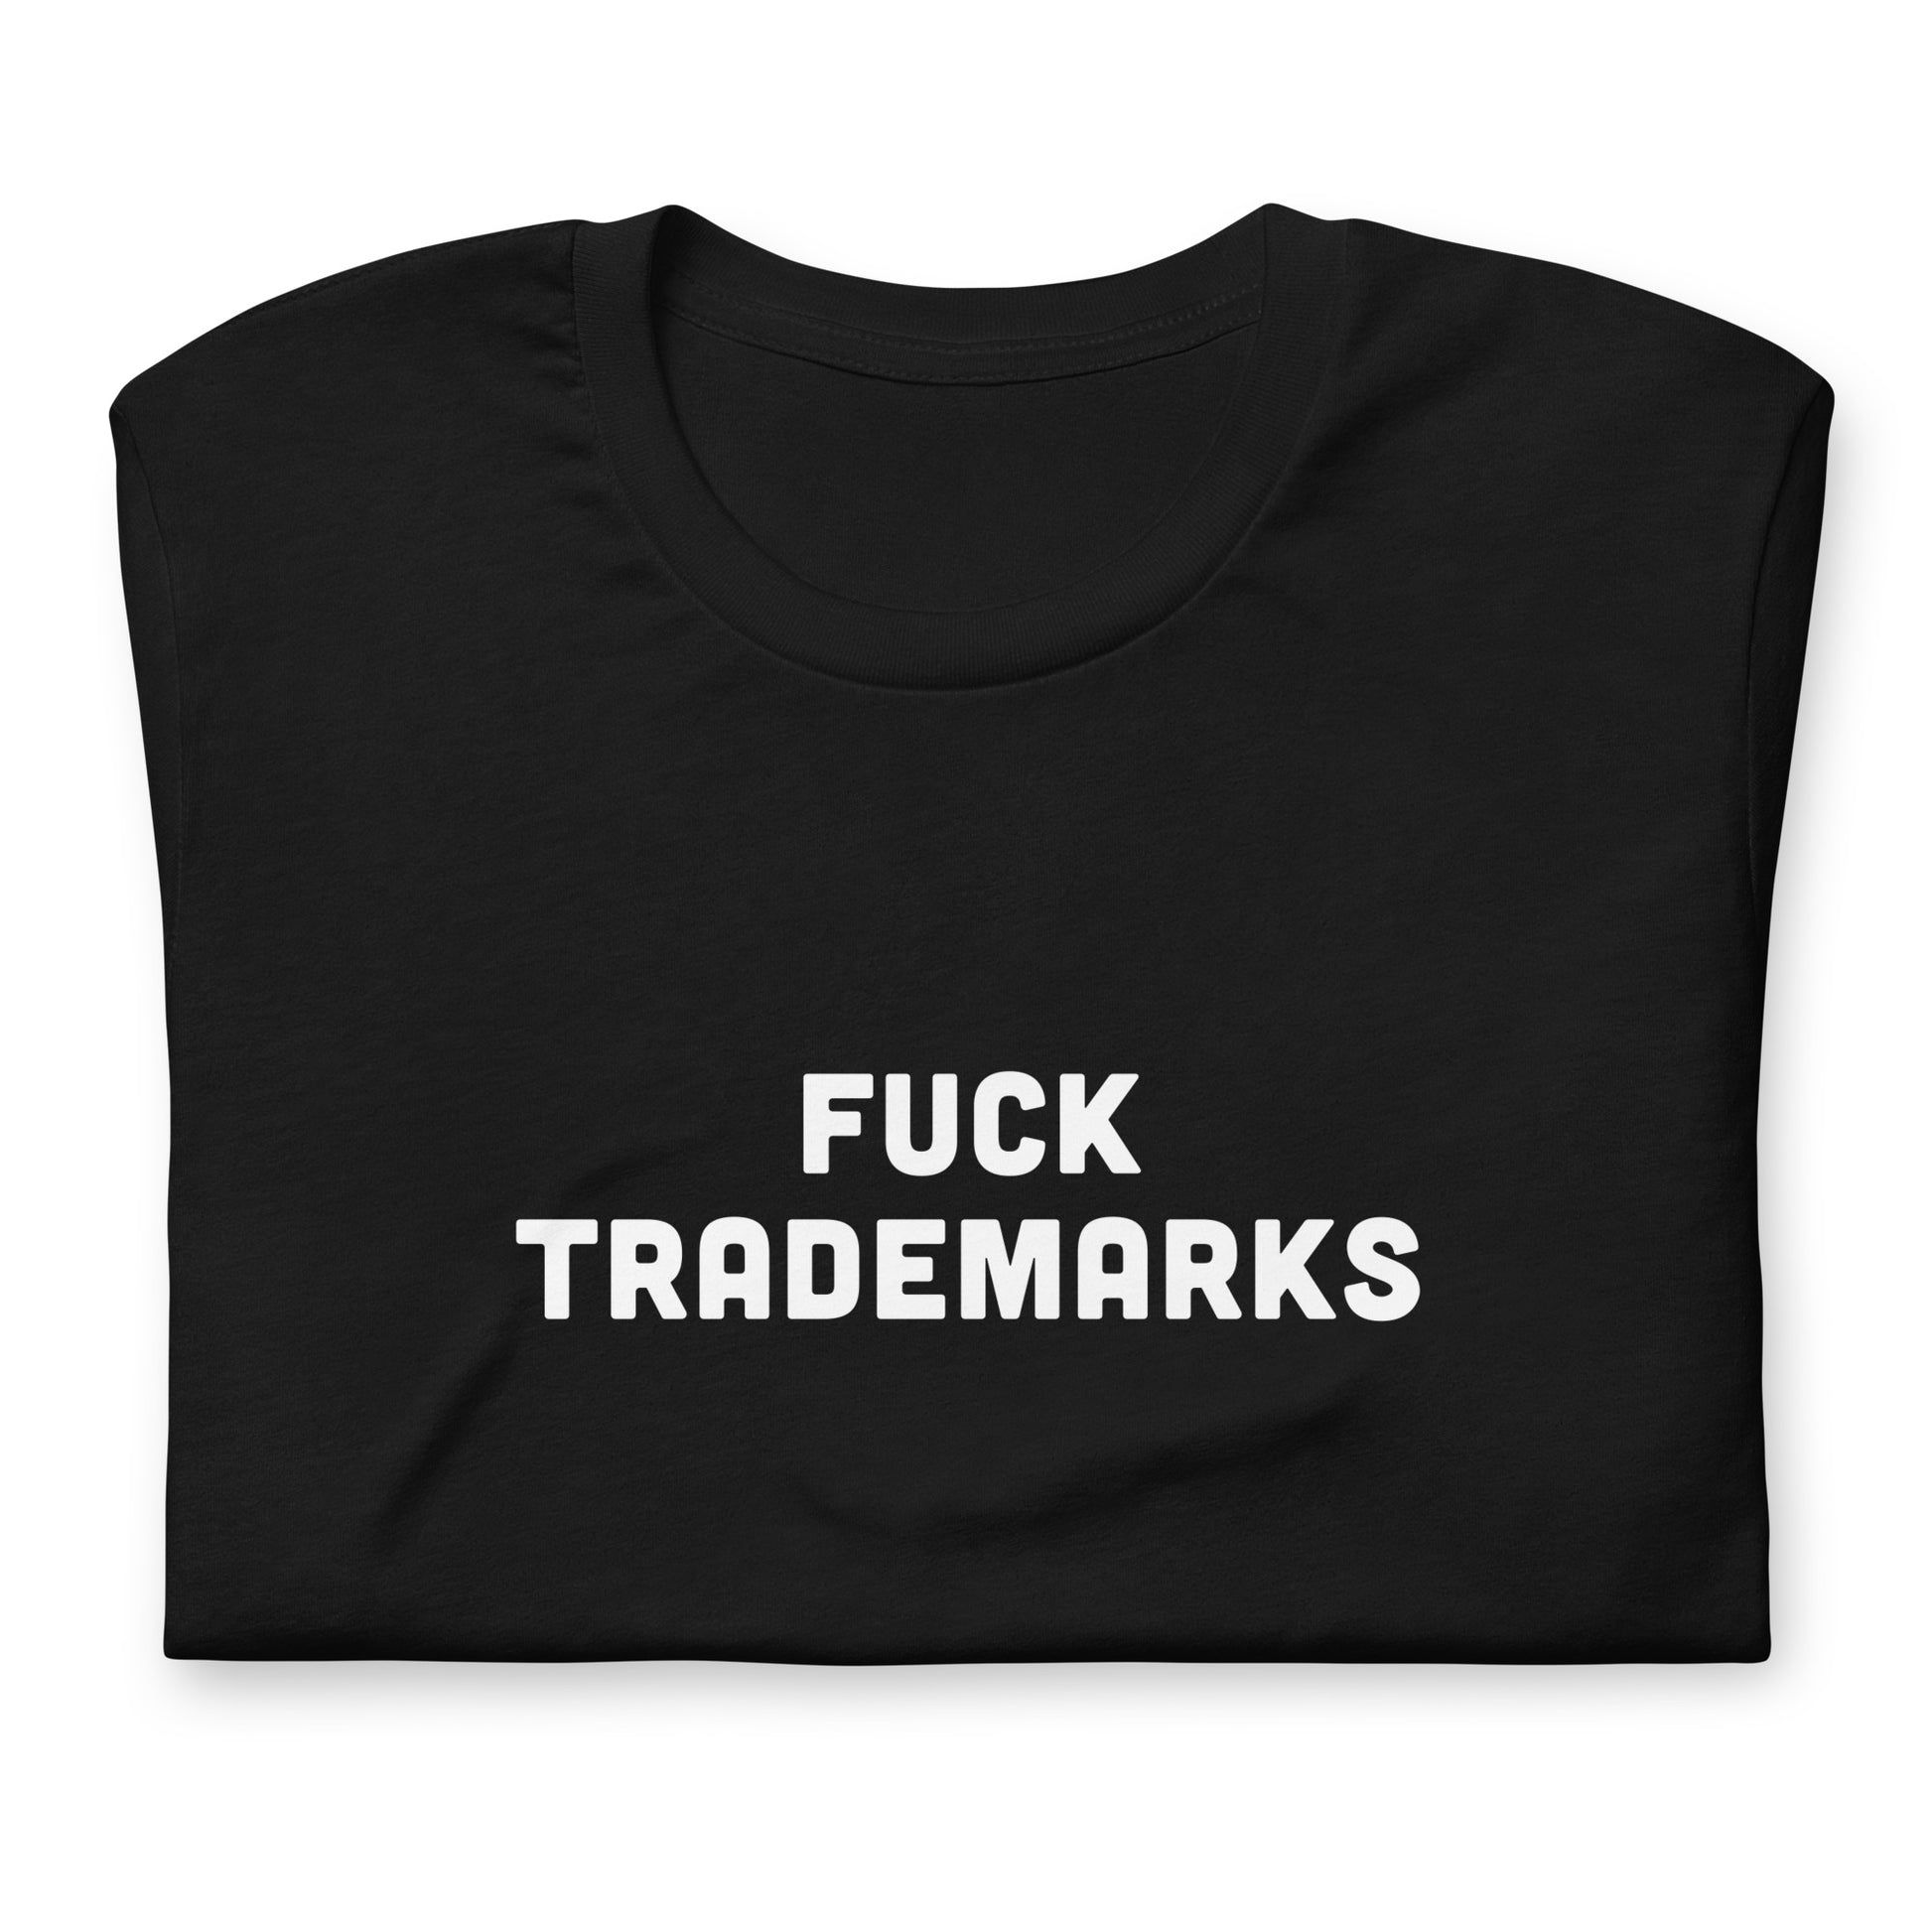 Fuck Trademarks T-Shirt Size M Color Black